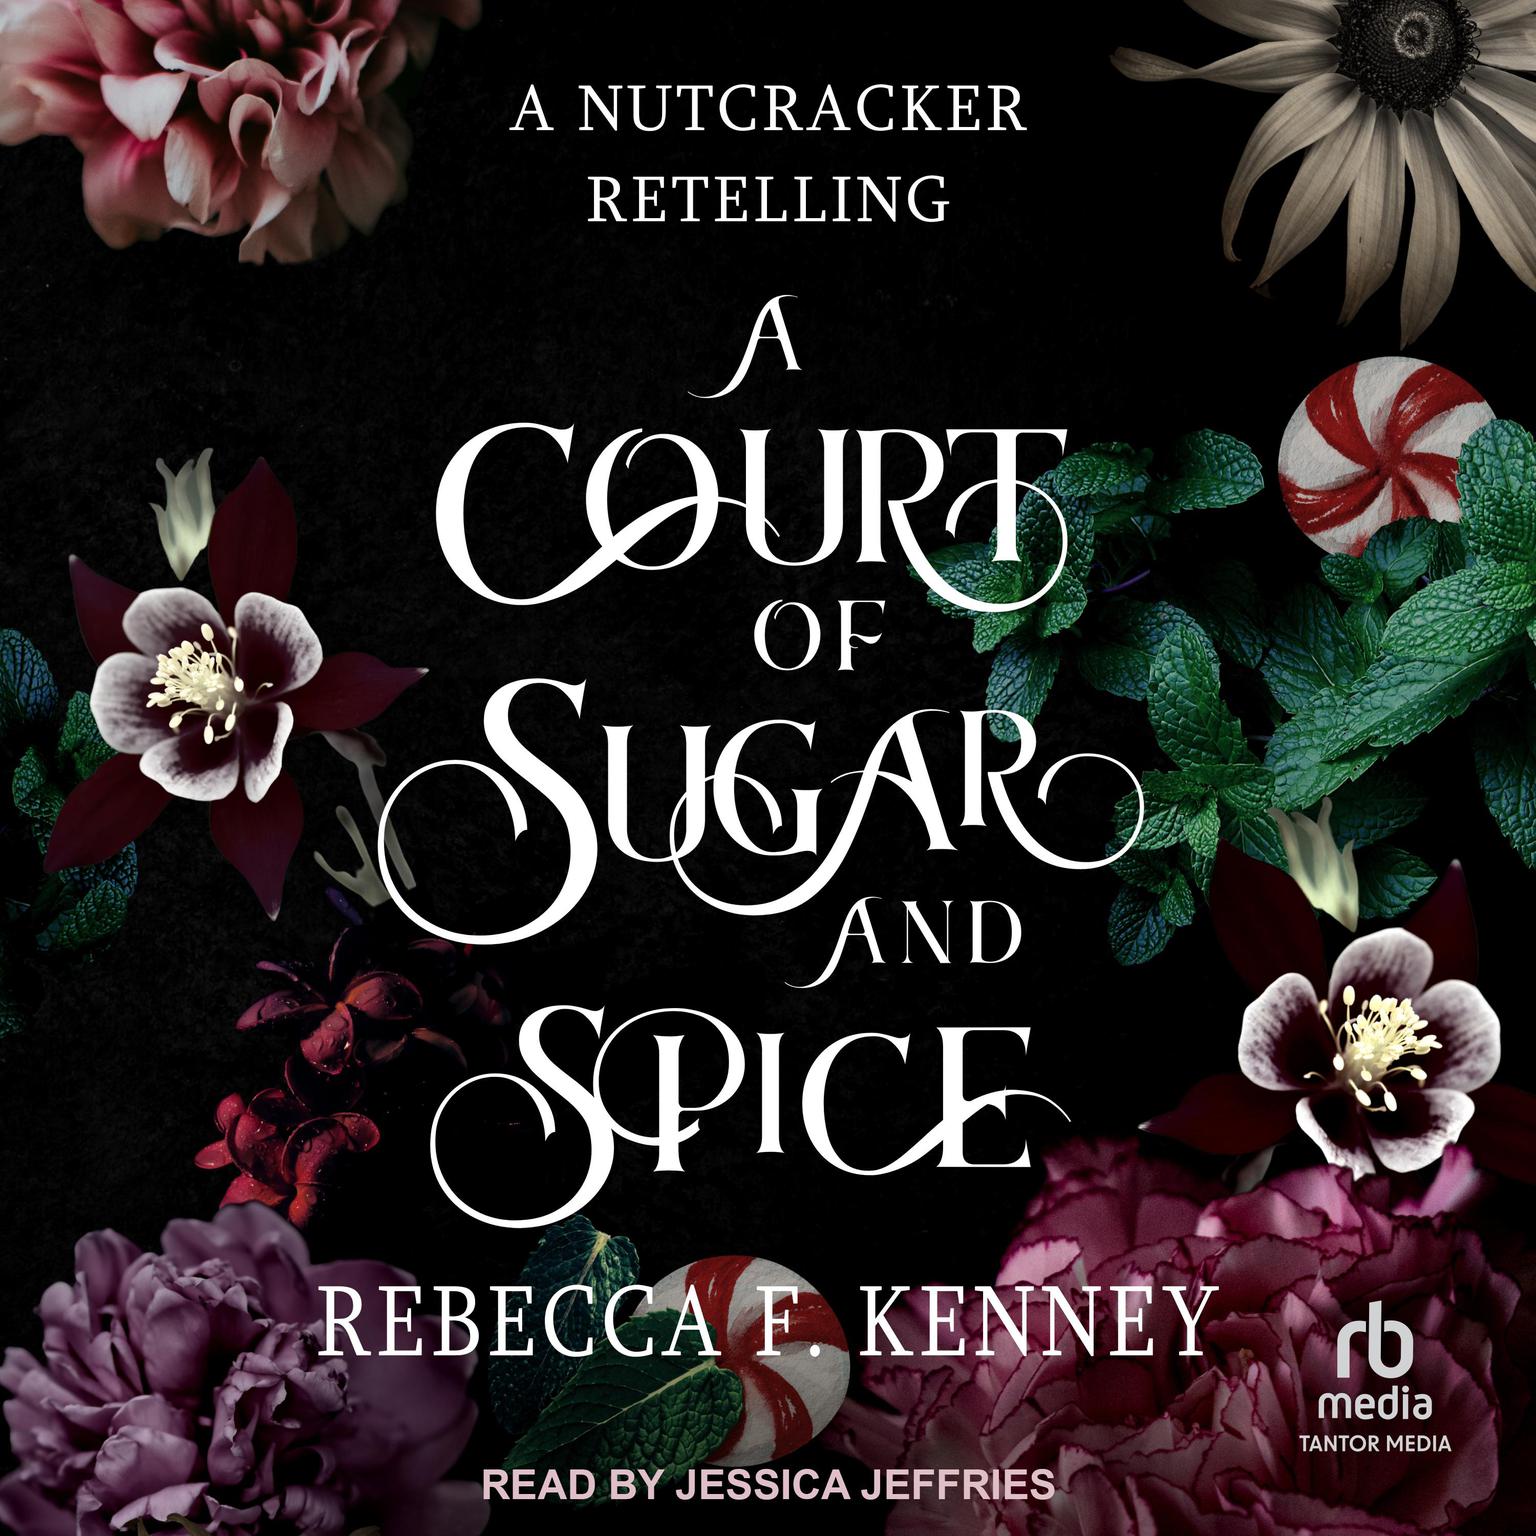 A Court of Sugar and Spice: A Nutcracker Retelling Audiobook, by Rebecca F. Kenney